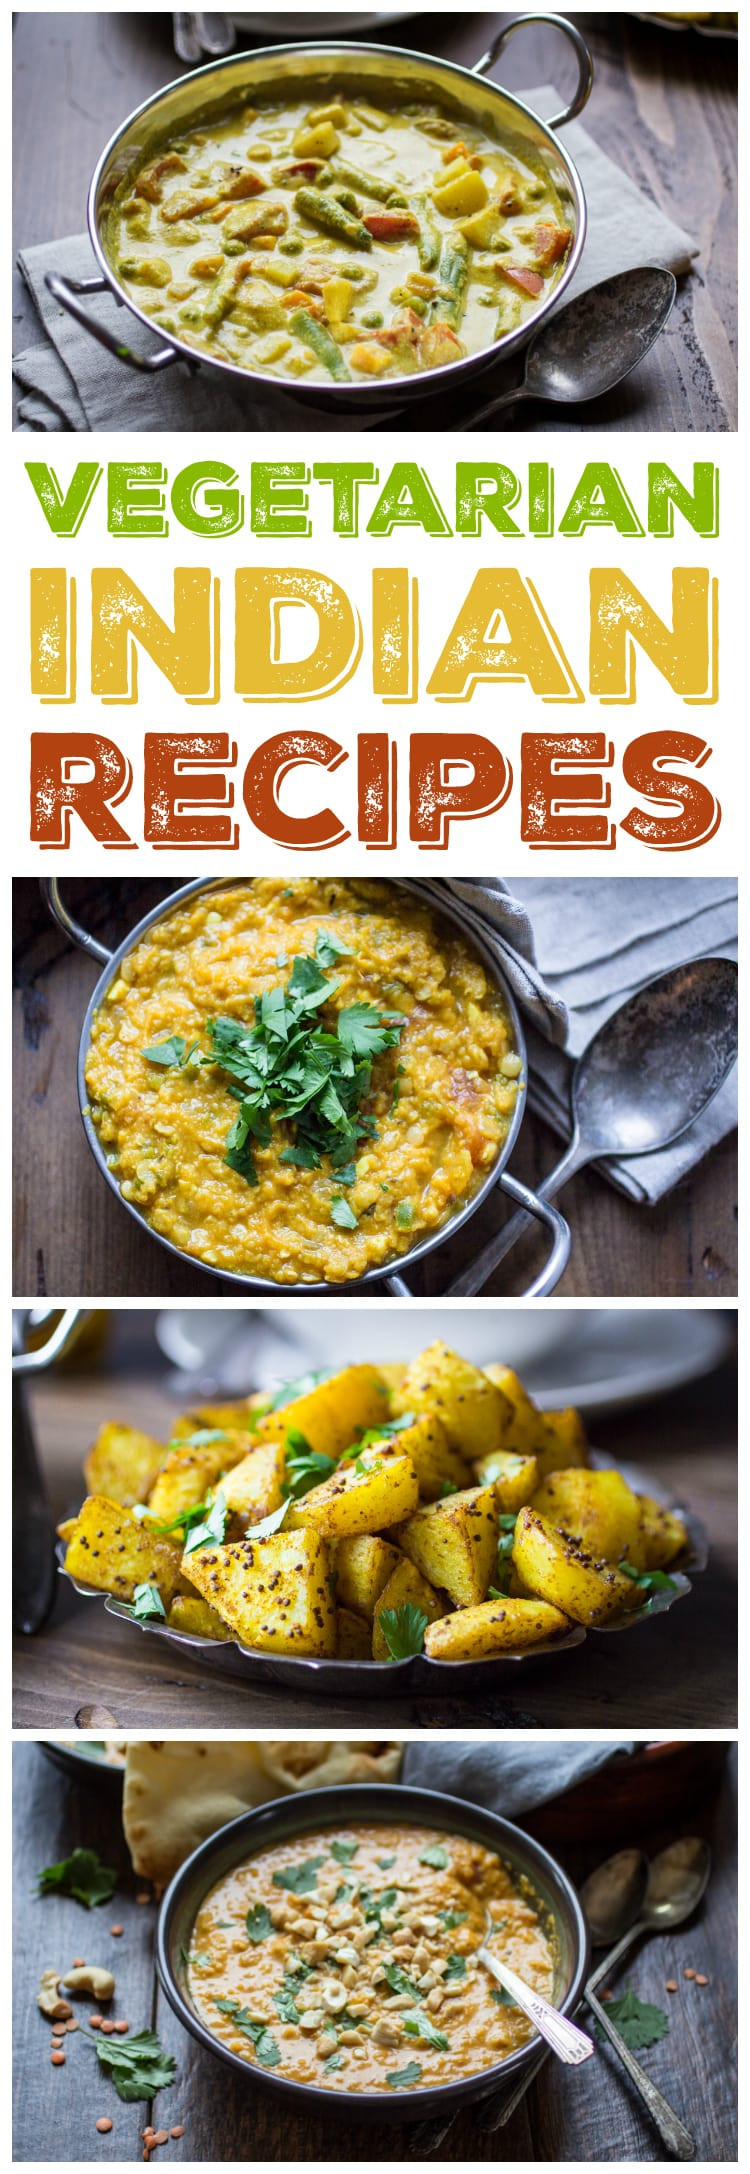 Indian Food Recipes Vegetarian
 10 Ve arian Indian Recipes to Make Again and Again The